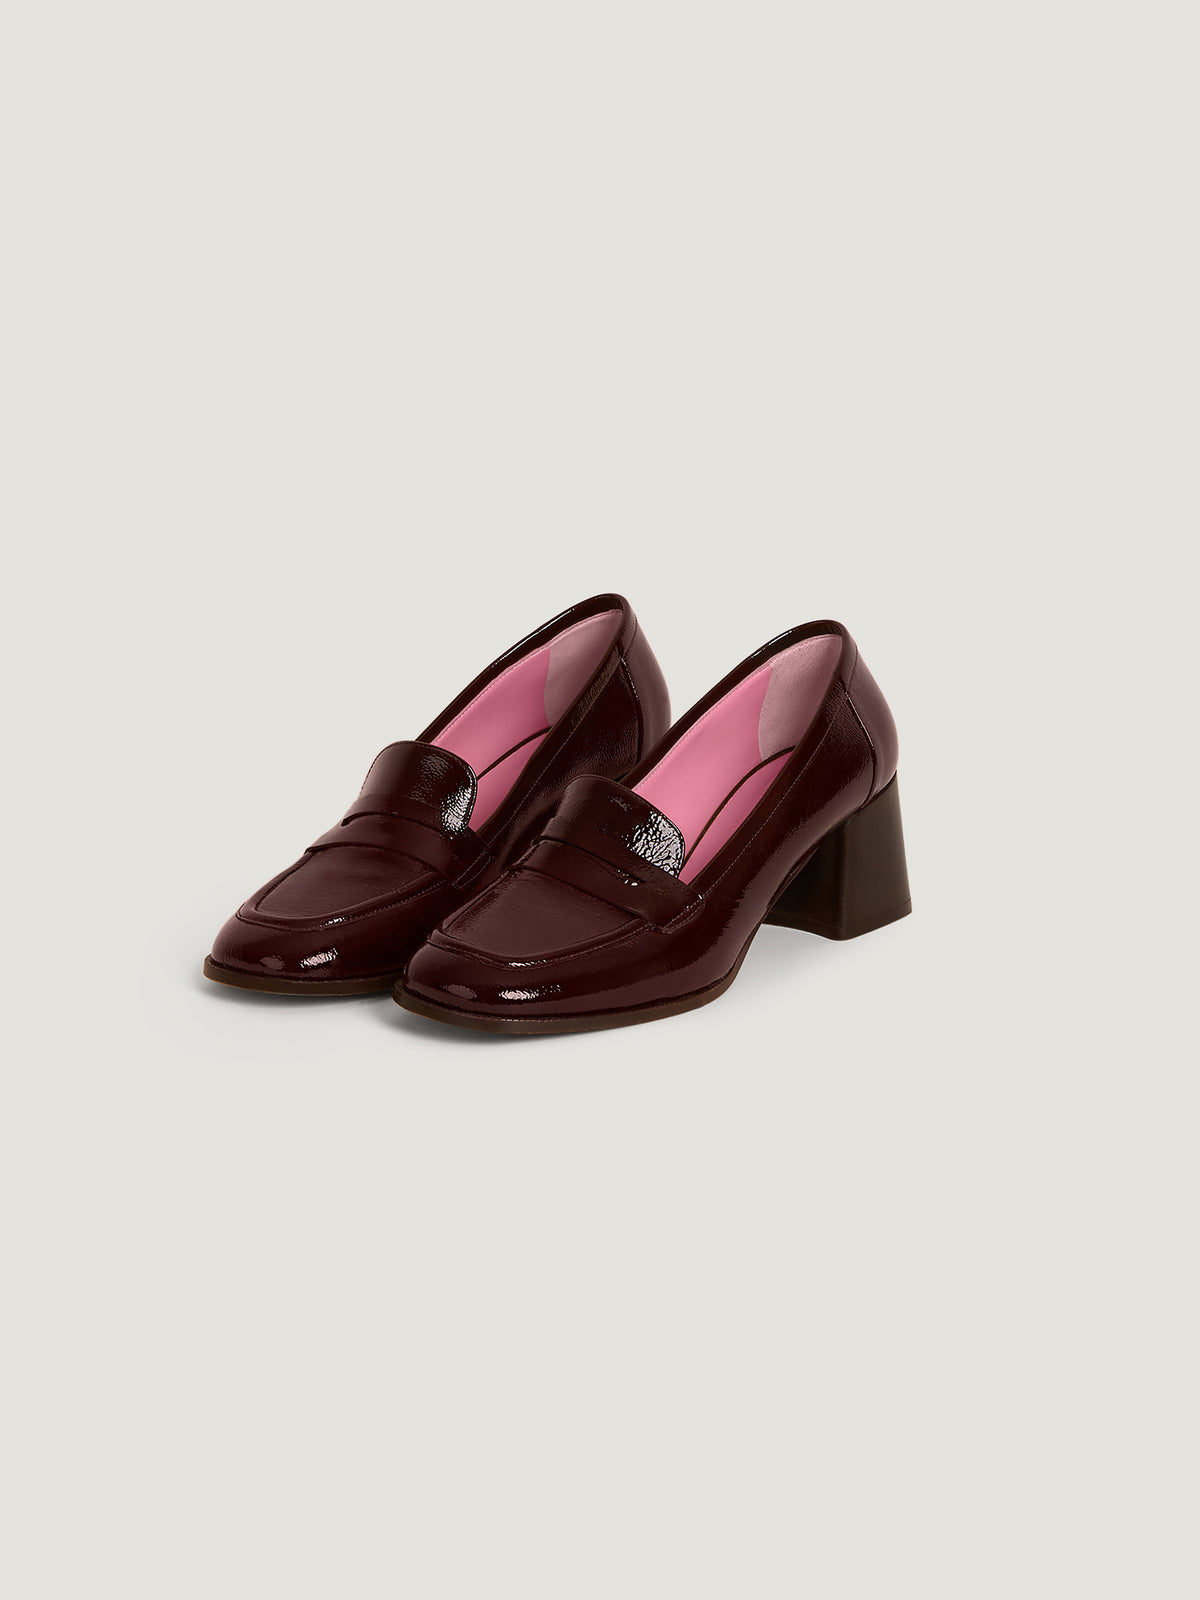 DOROTHEE loafers